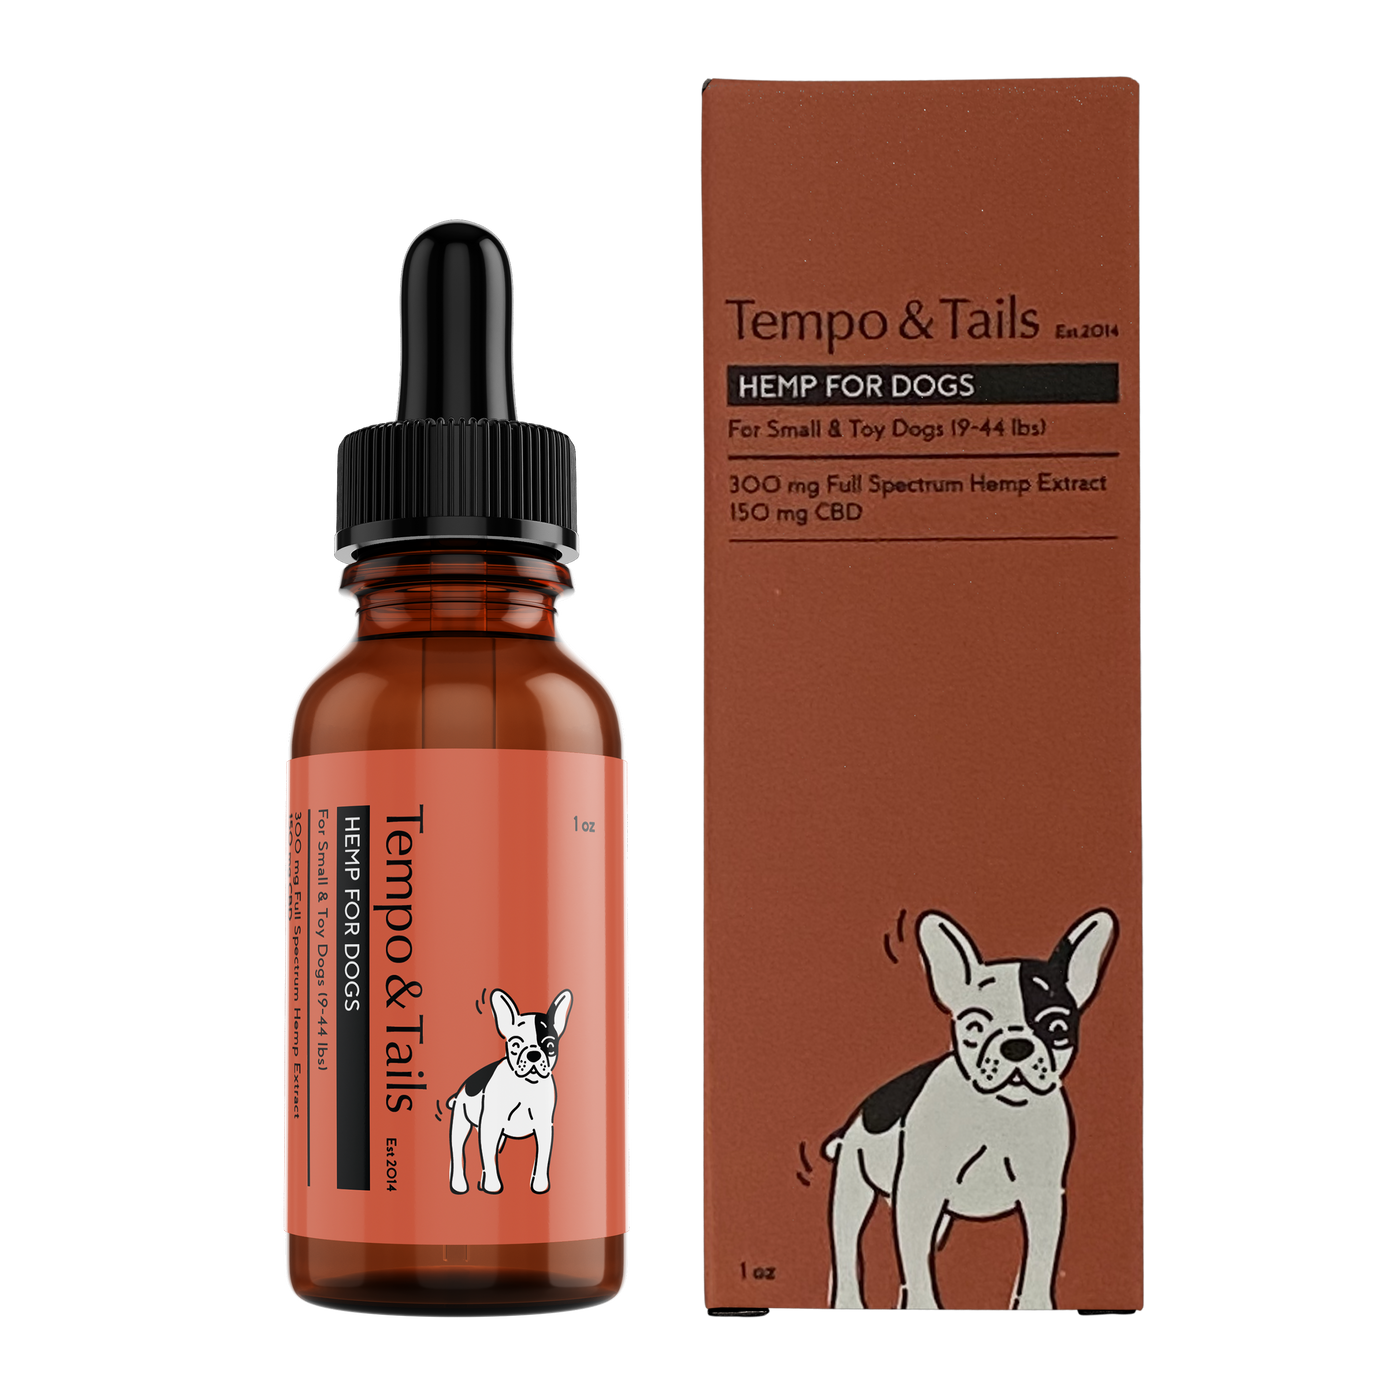 Oil for Small Dogs (9-44 Lbs.)